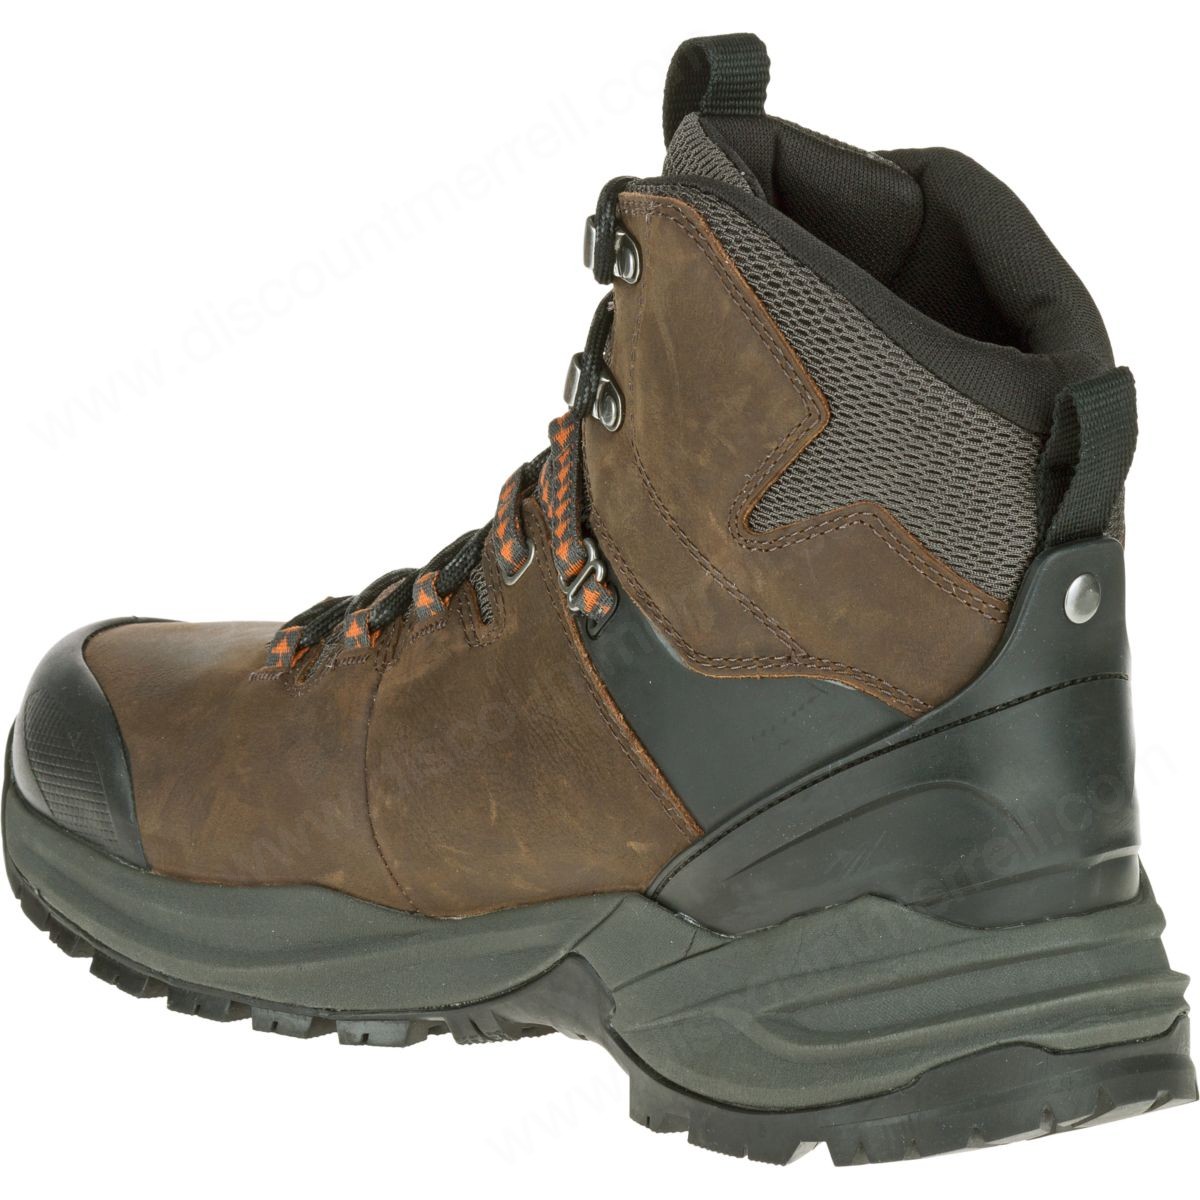 Merrell Man's Phaserbound Waterproof Clay - -6